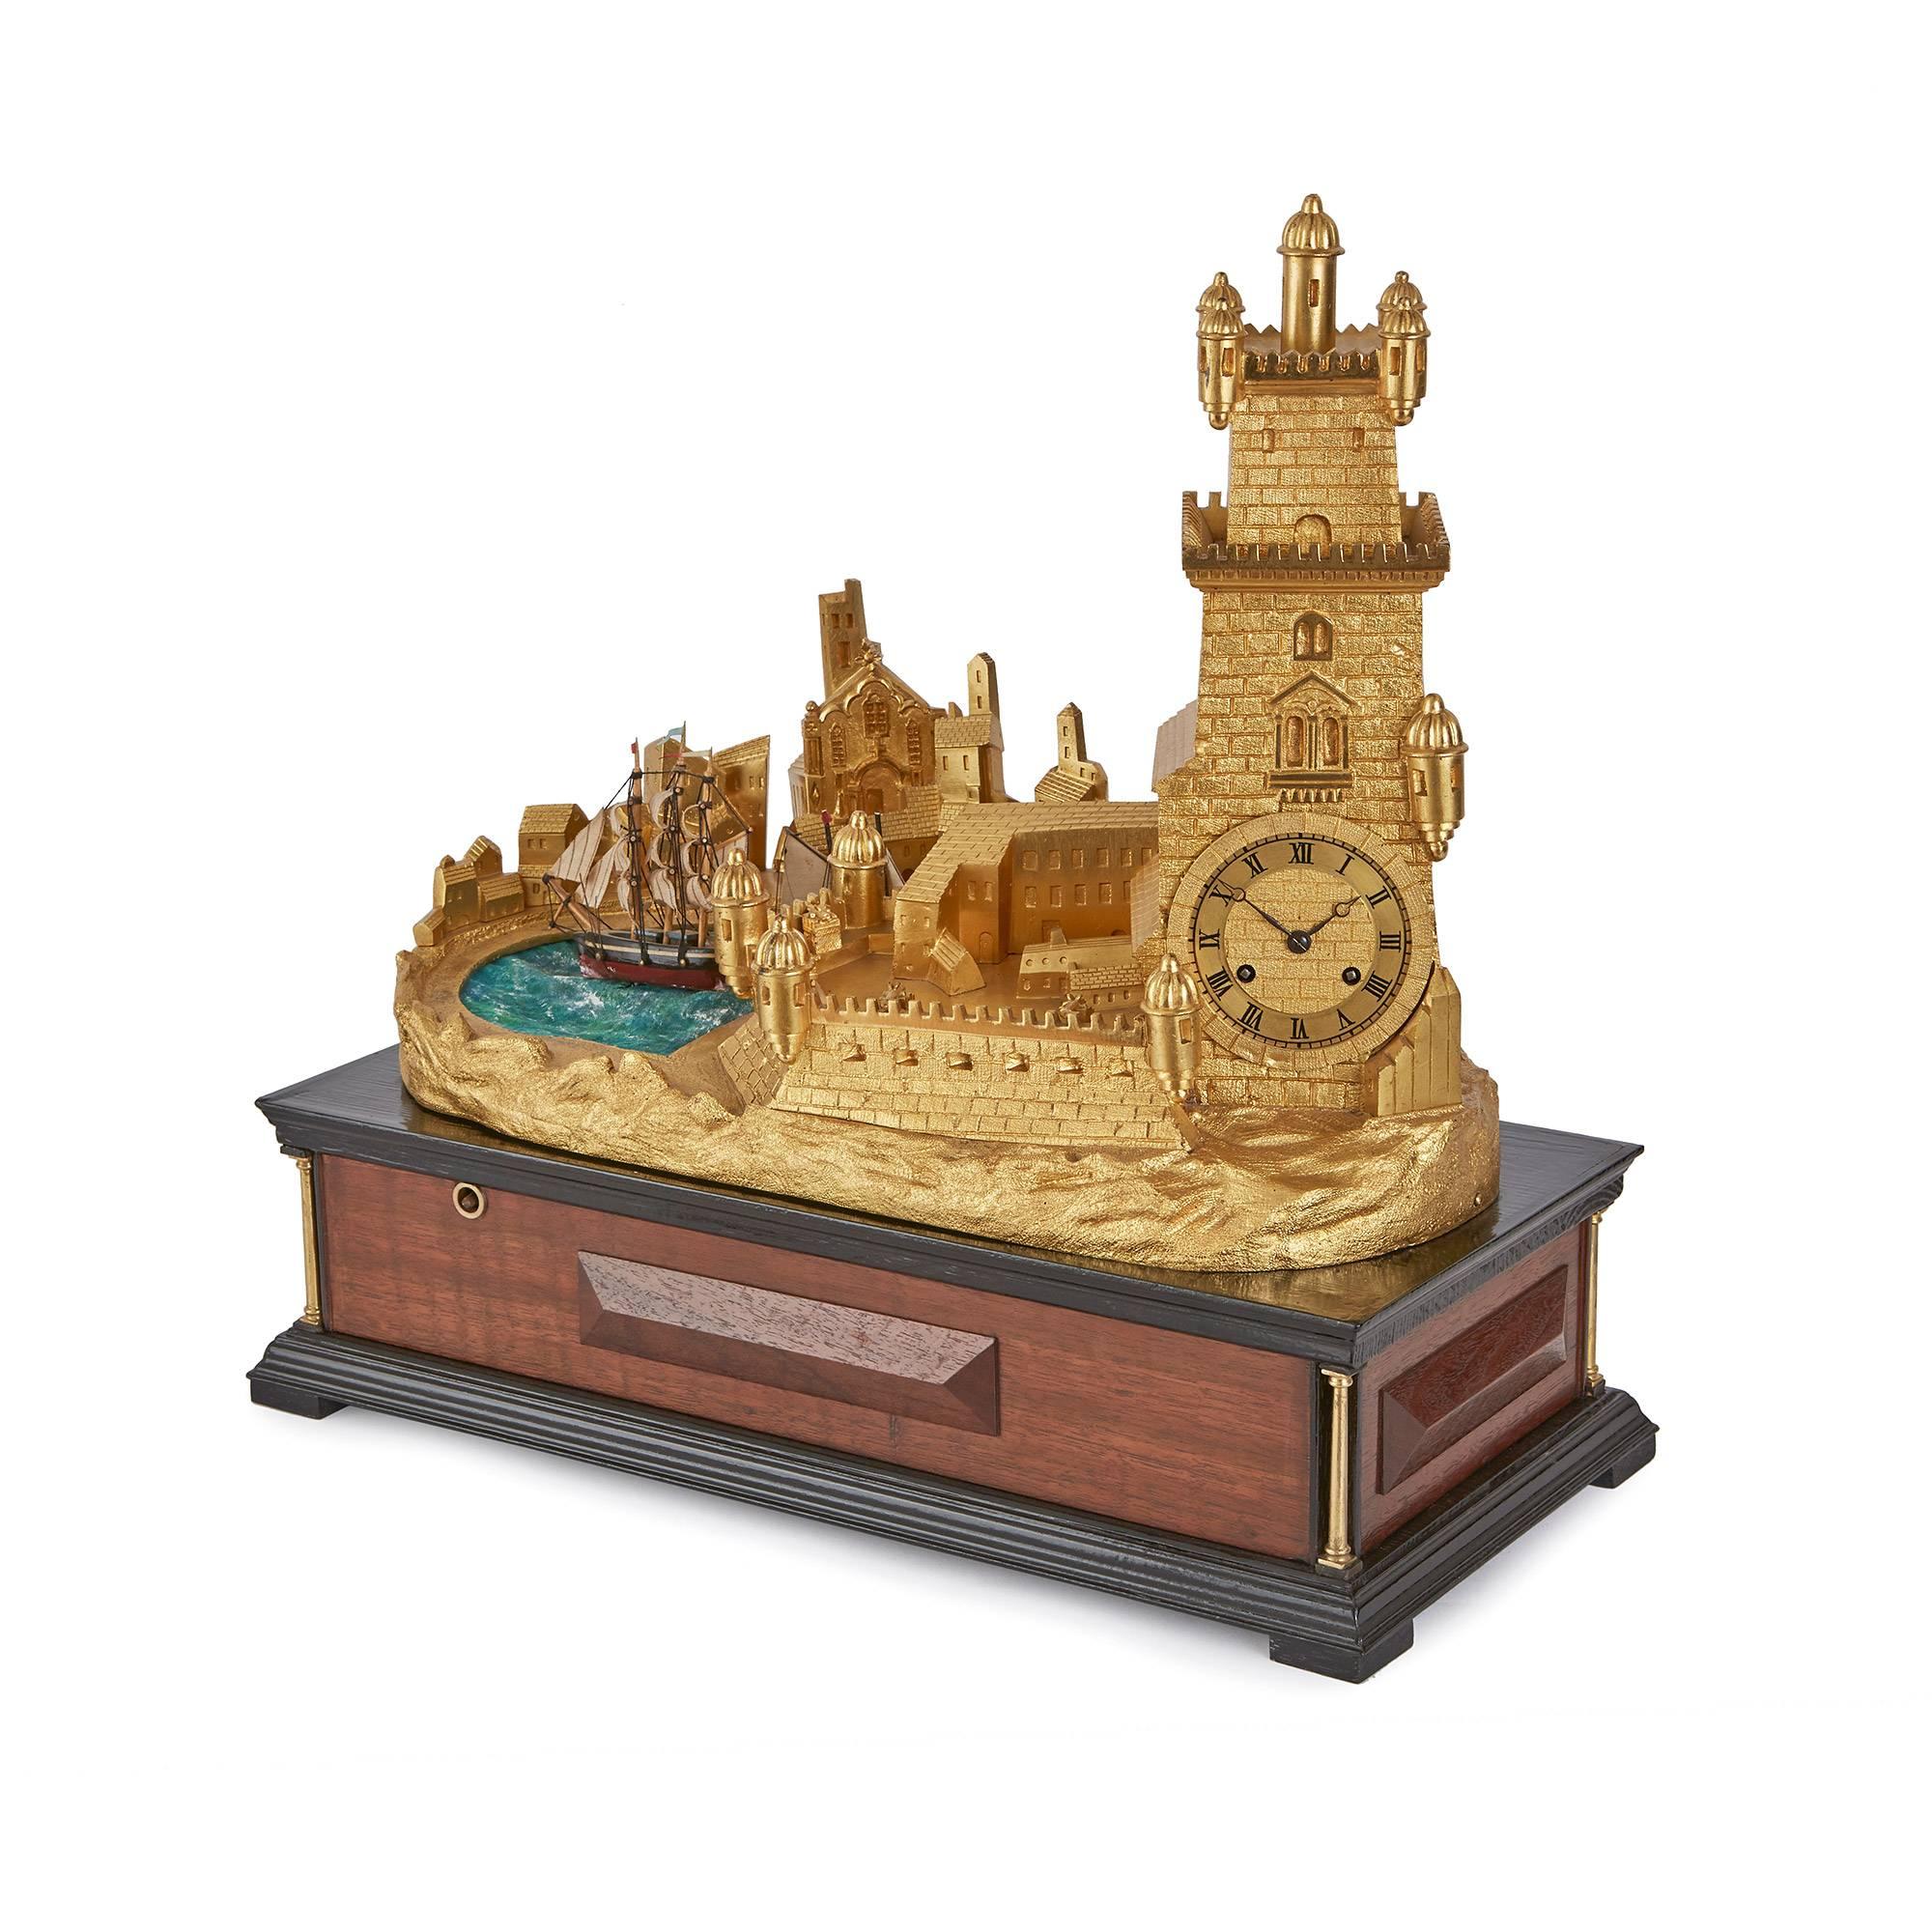 This beautiful mantel clock is modelled on the Torre de Belém in Lisbon, Portugal, and incorporates an unusual mechanical automaton device that periodically moves the ship.

The circular dial set within the castle tower shaped case, its suspension